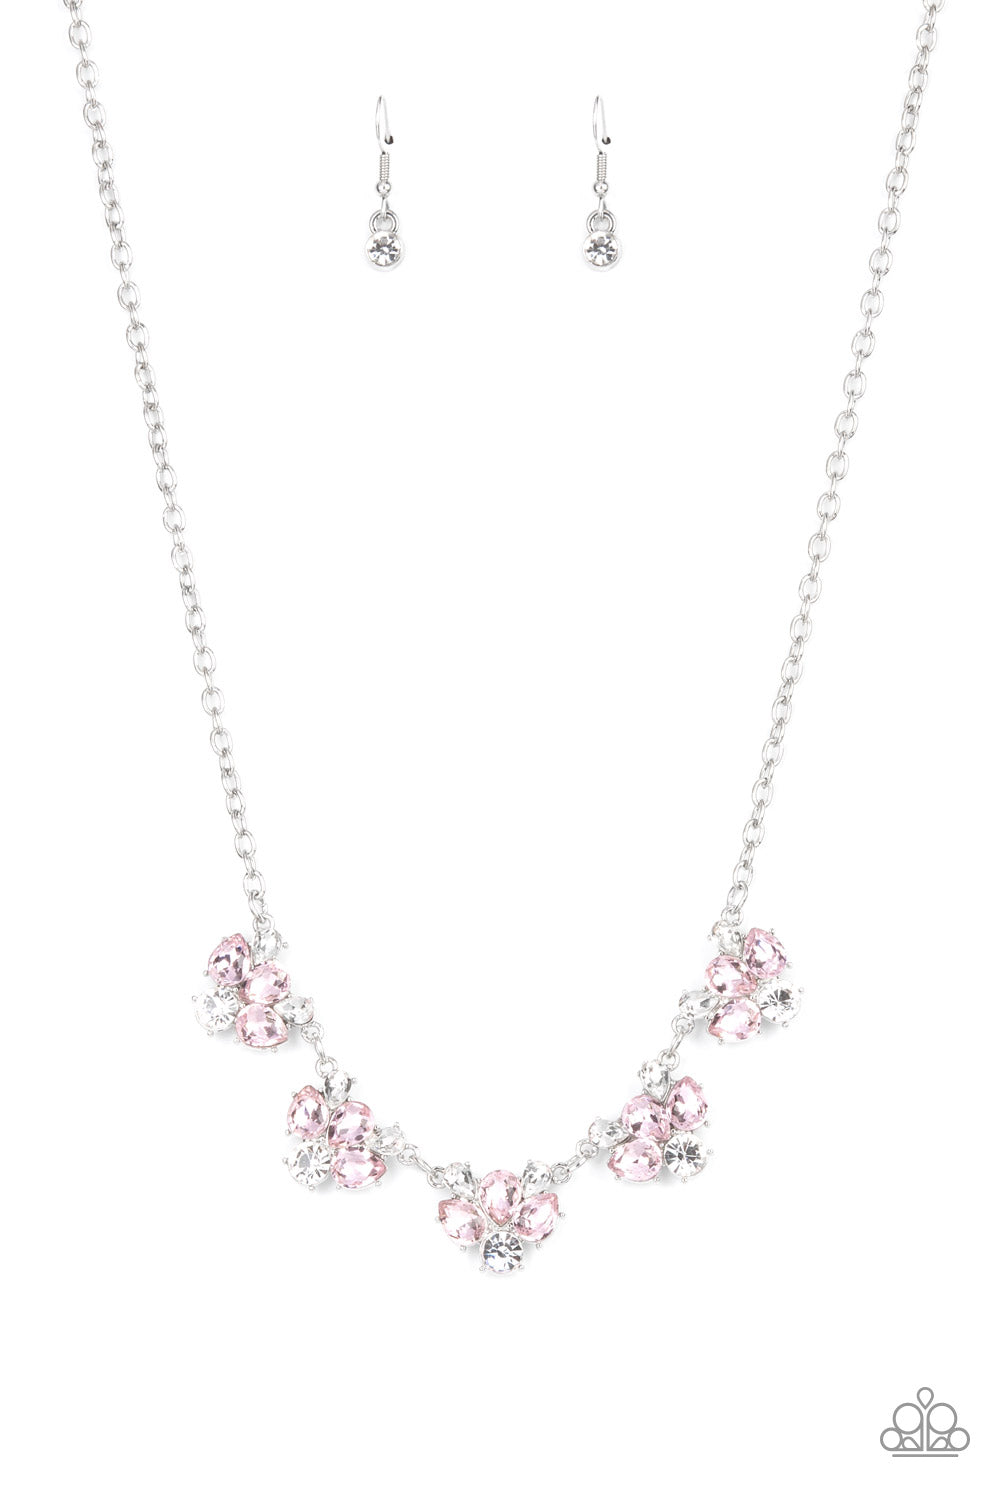 Envious Elegance Necklace (Pink, Silver)